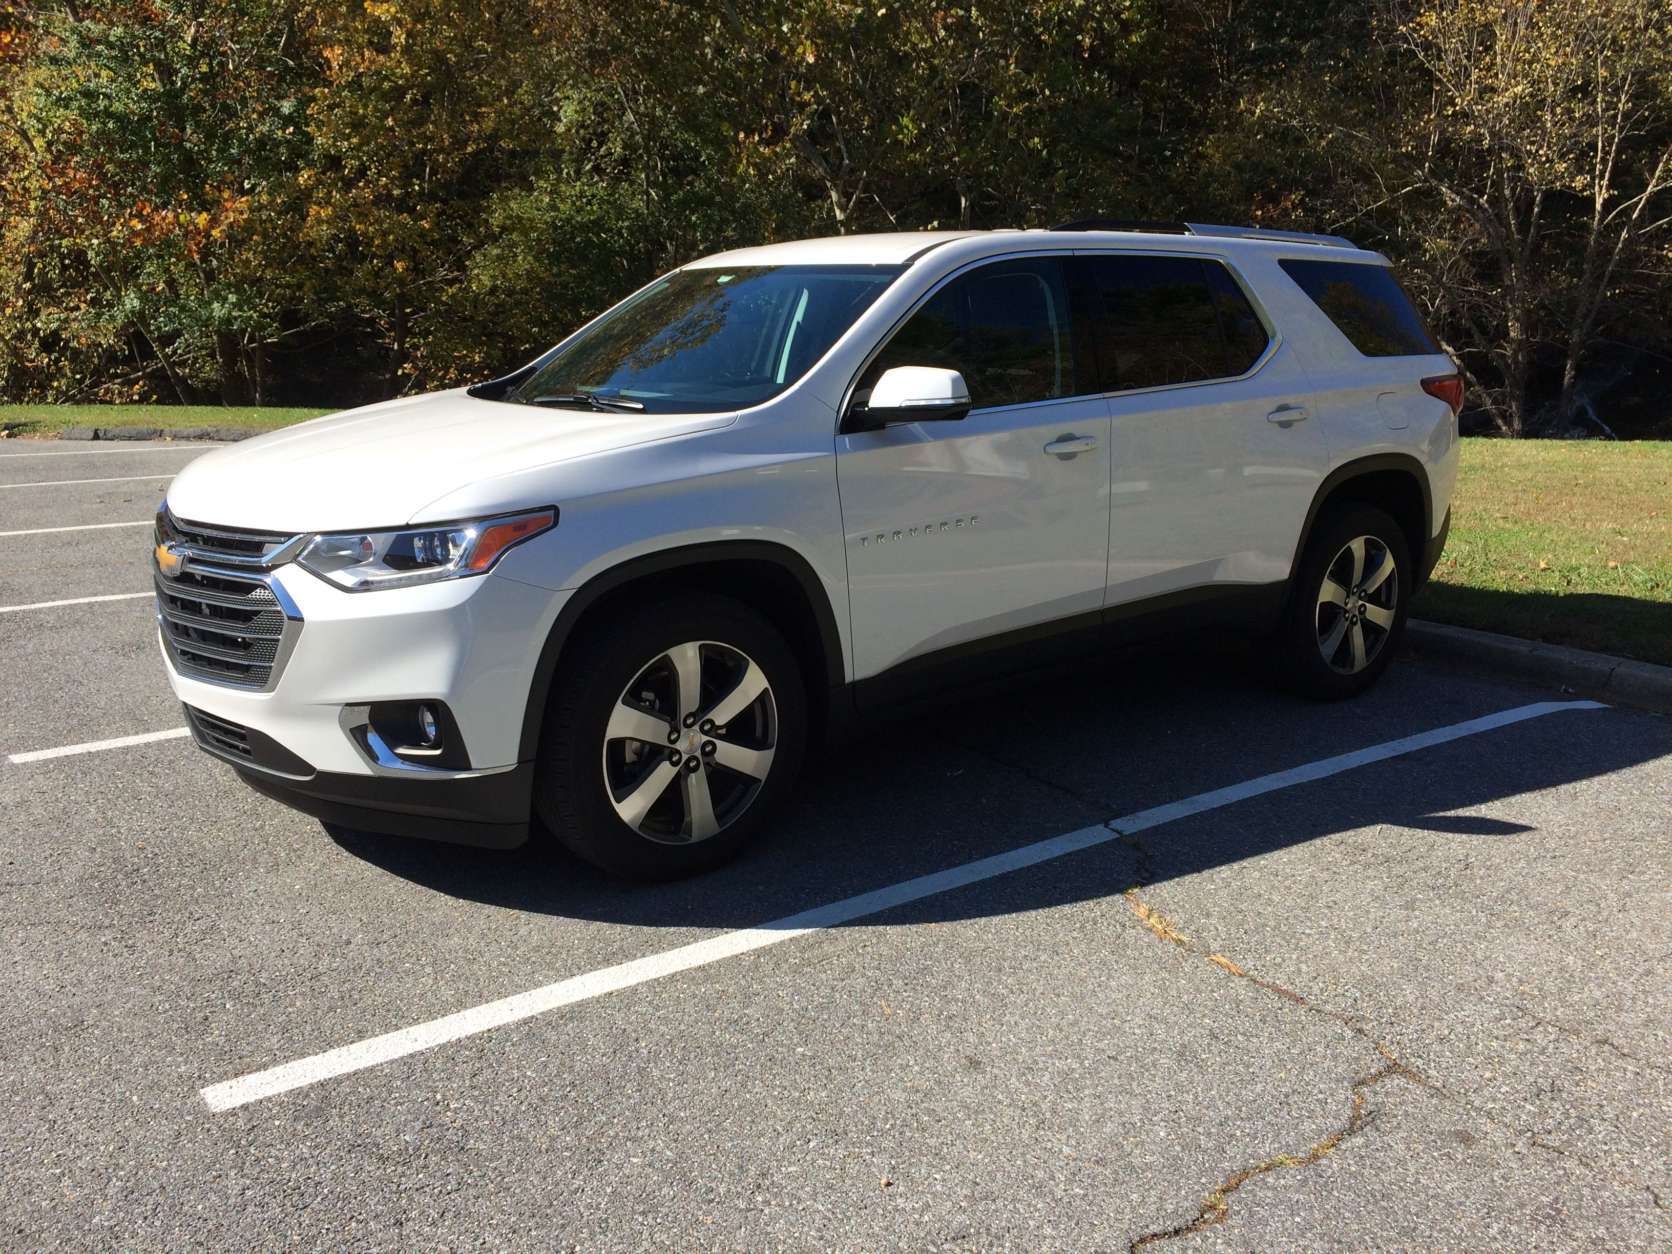 The Traverse remains one of the largest midsize crossovers on the market. (WTOP/Mike Parris)